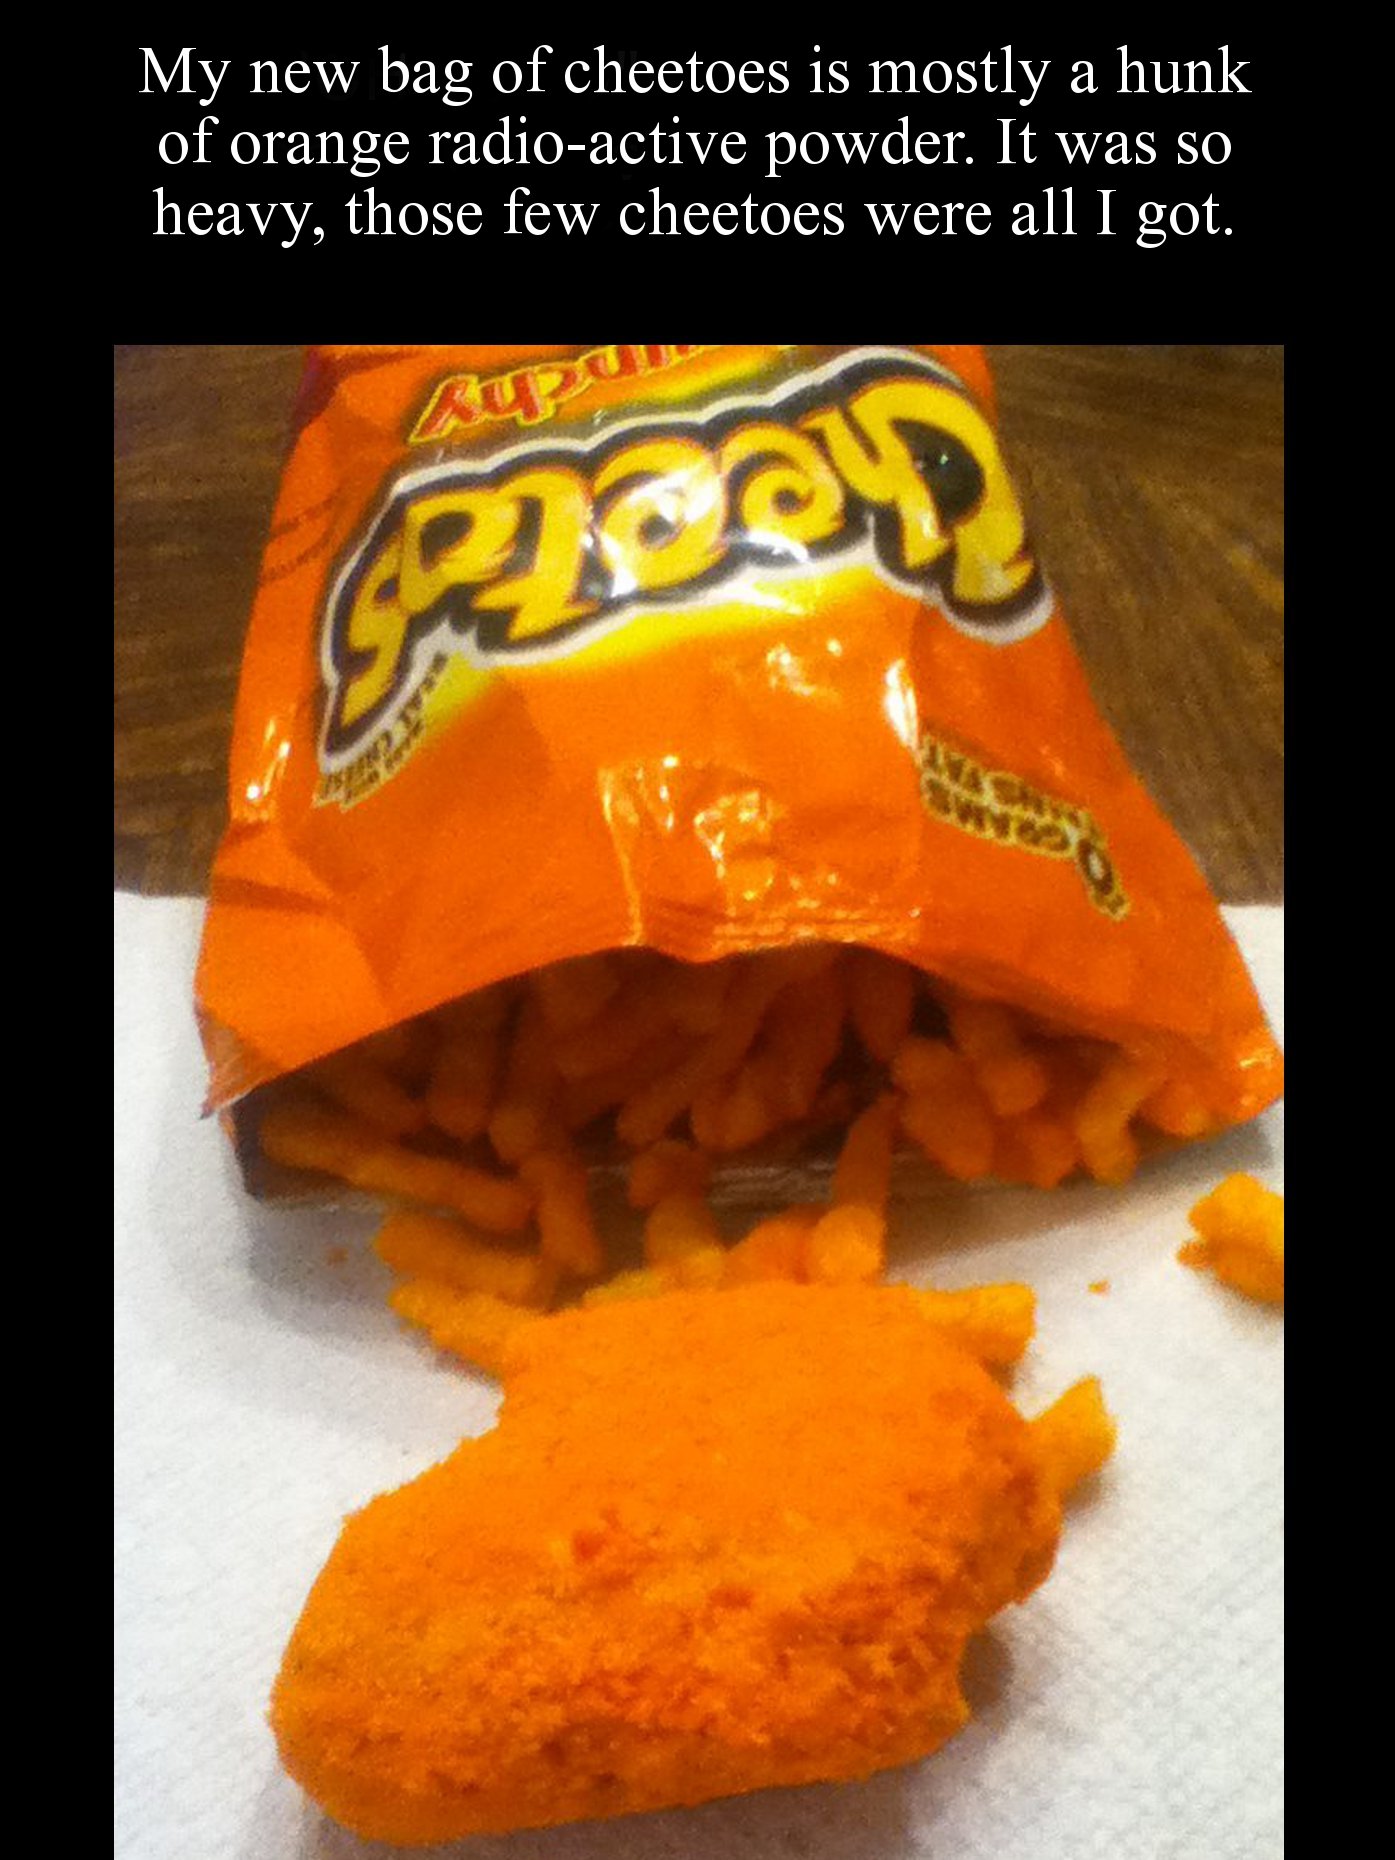 open cheetos - My new bag of cheetoes is mostly a hunk of orange radioactive powder. It was so heavy, those few cheetoes were all I got. C.